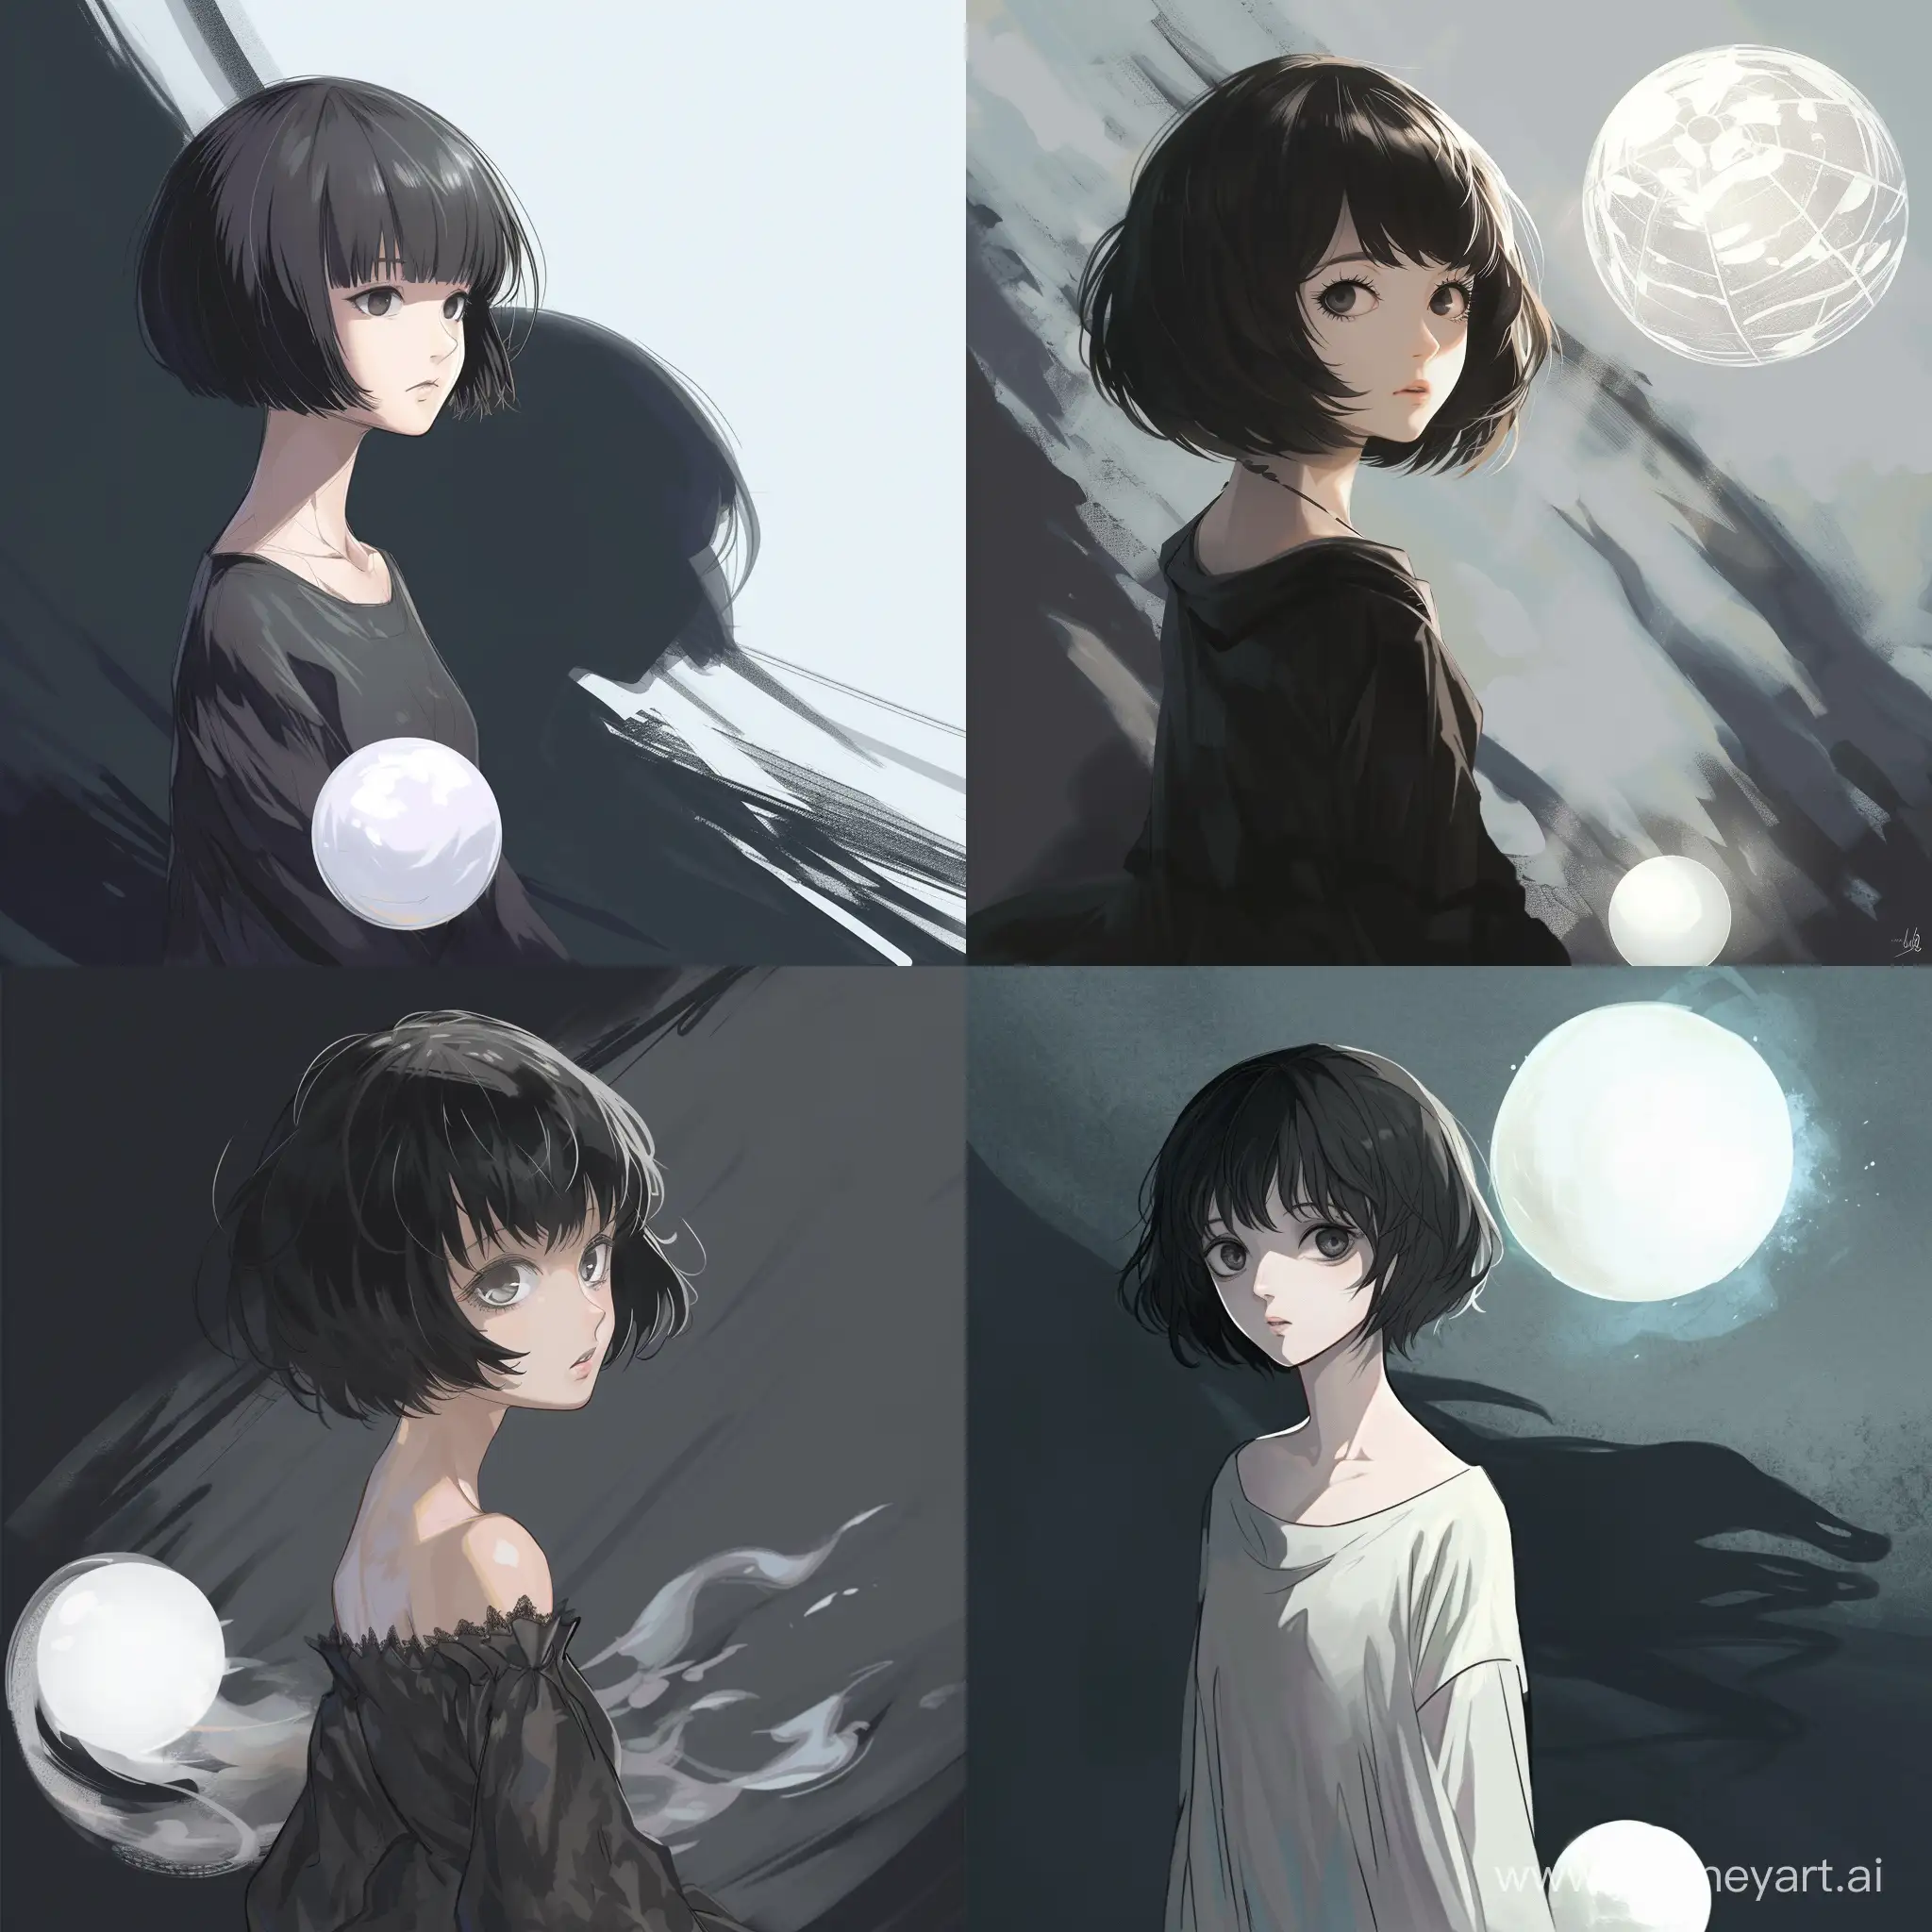 Mysterious-Anime-Girl-with-Short-Black-Hair-and-Enigmatic-Light-Orb